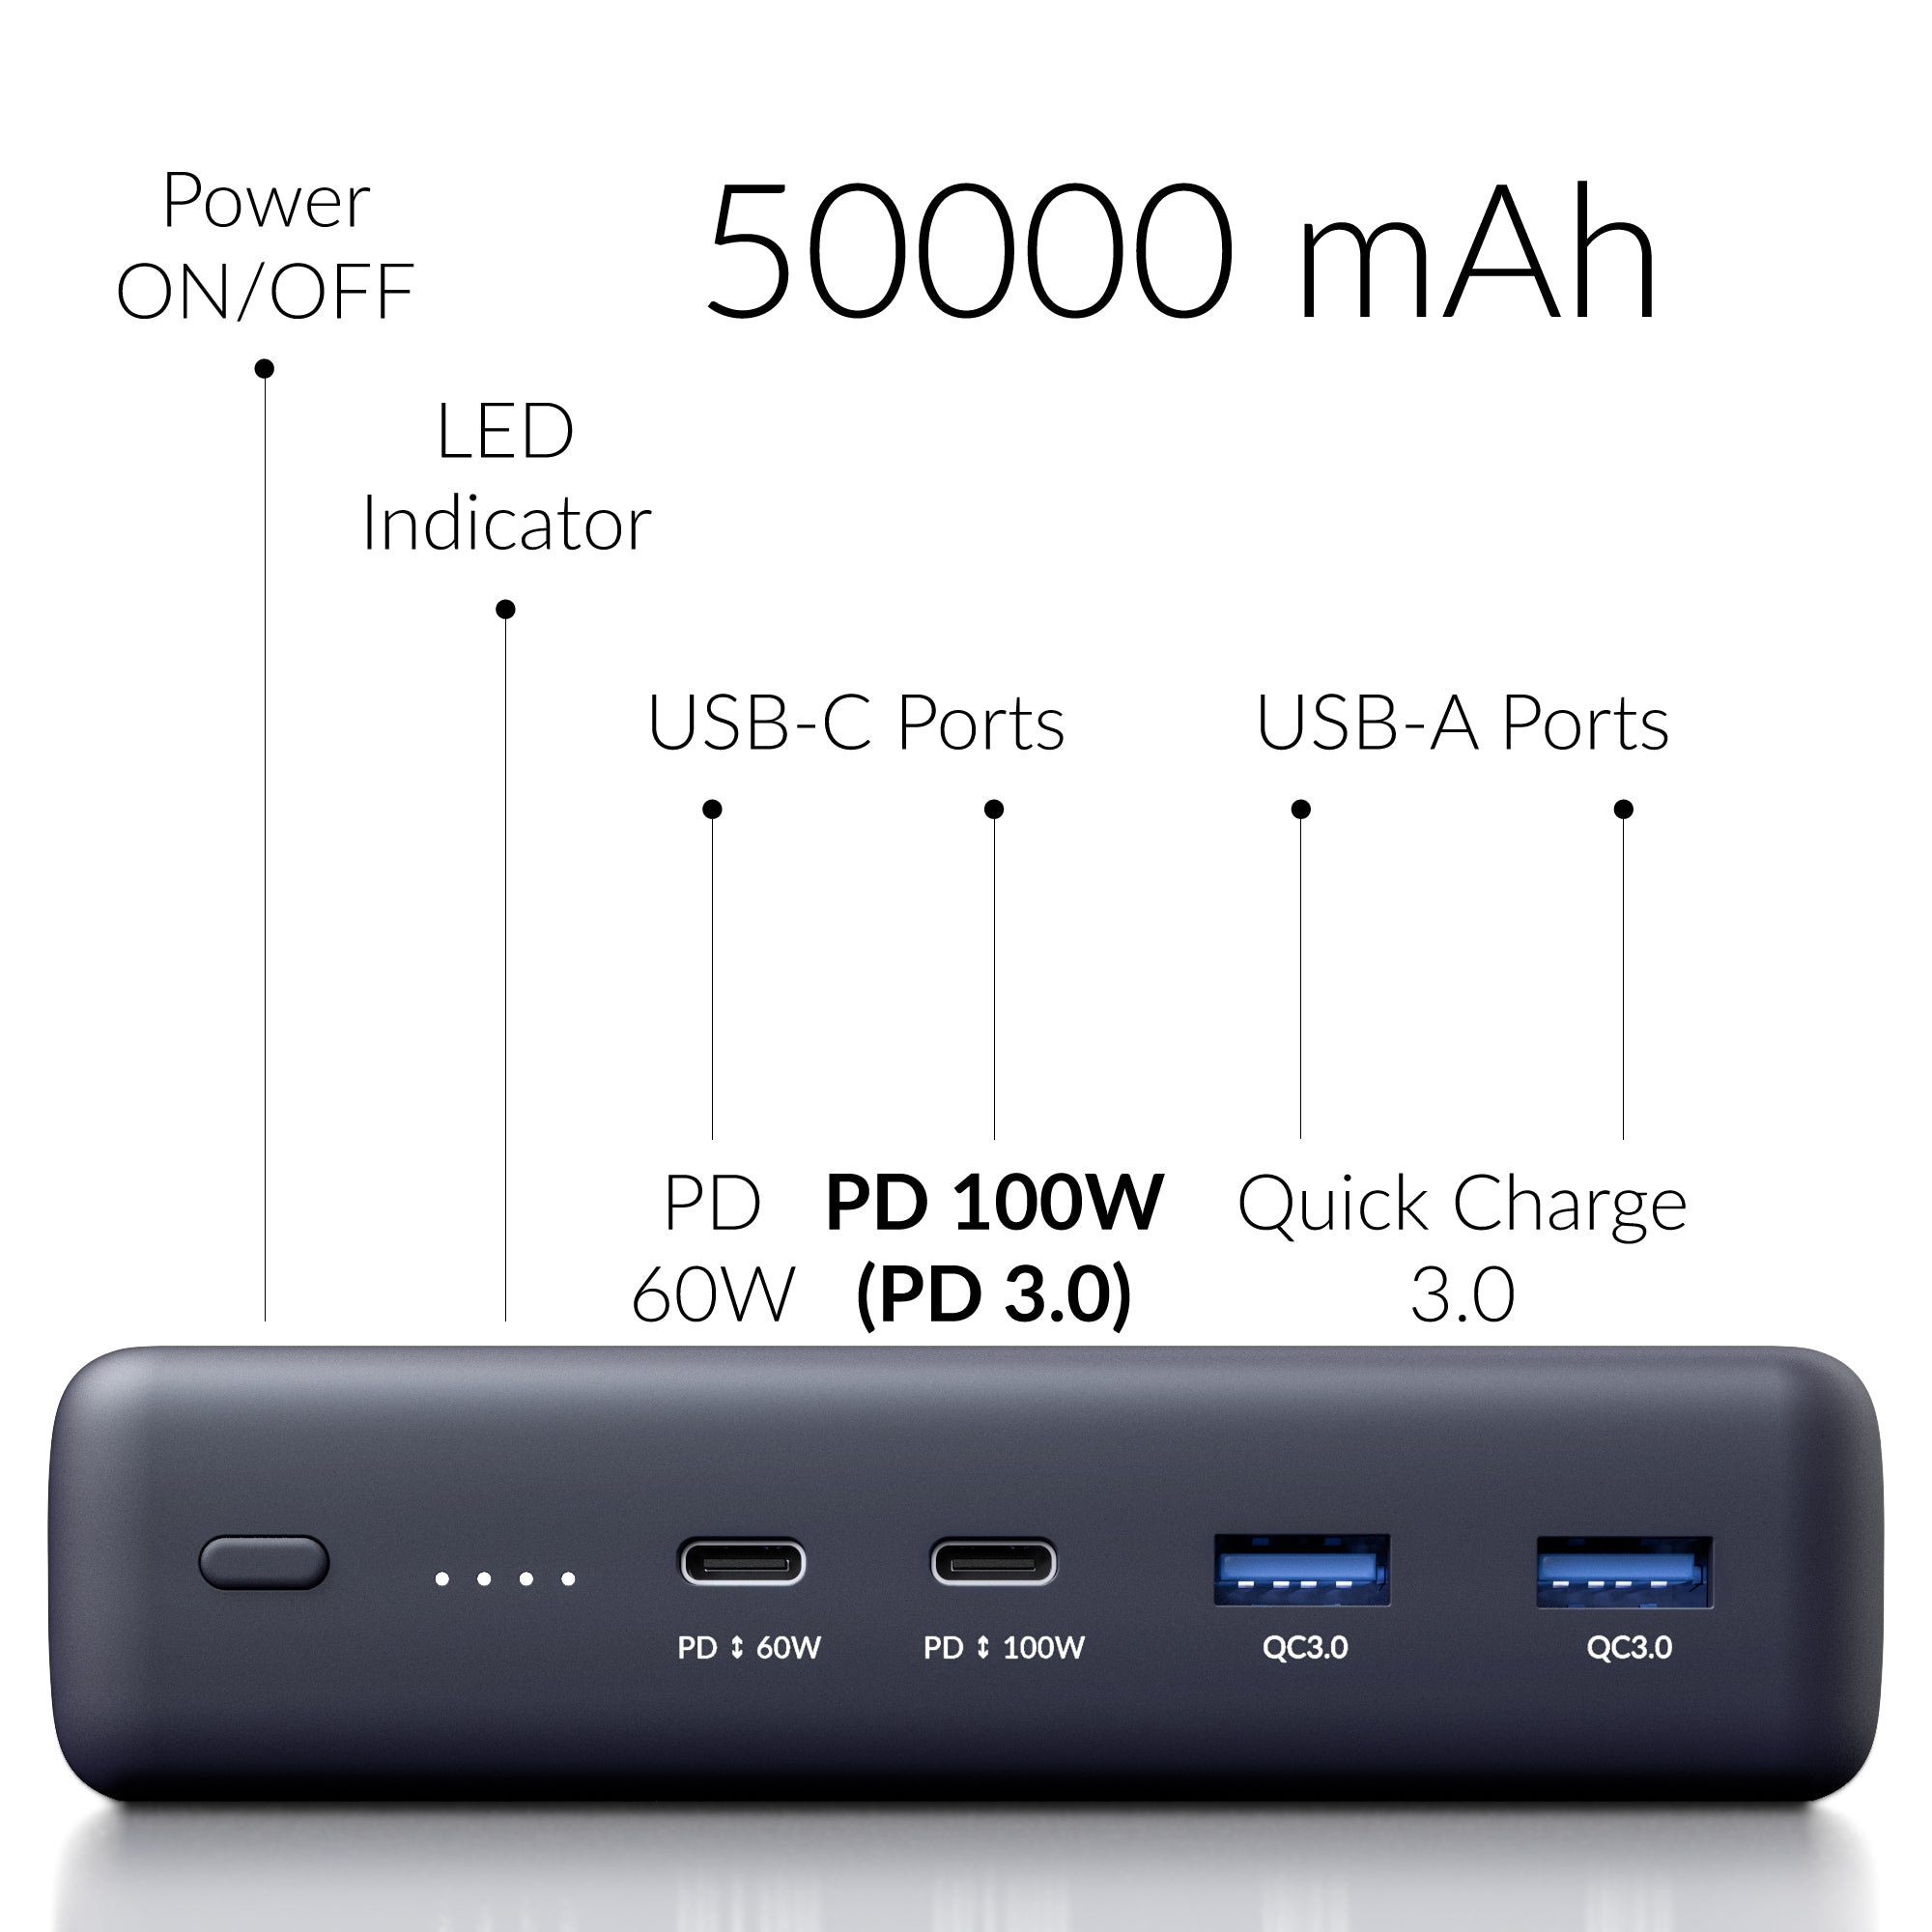 3-Pack of Crave PowerPack 2, 50000 mAh, Dual USB QC3.0 / Dual Power Delivery Charger for Laptop